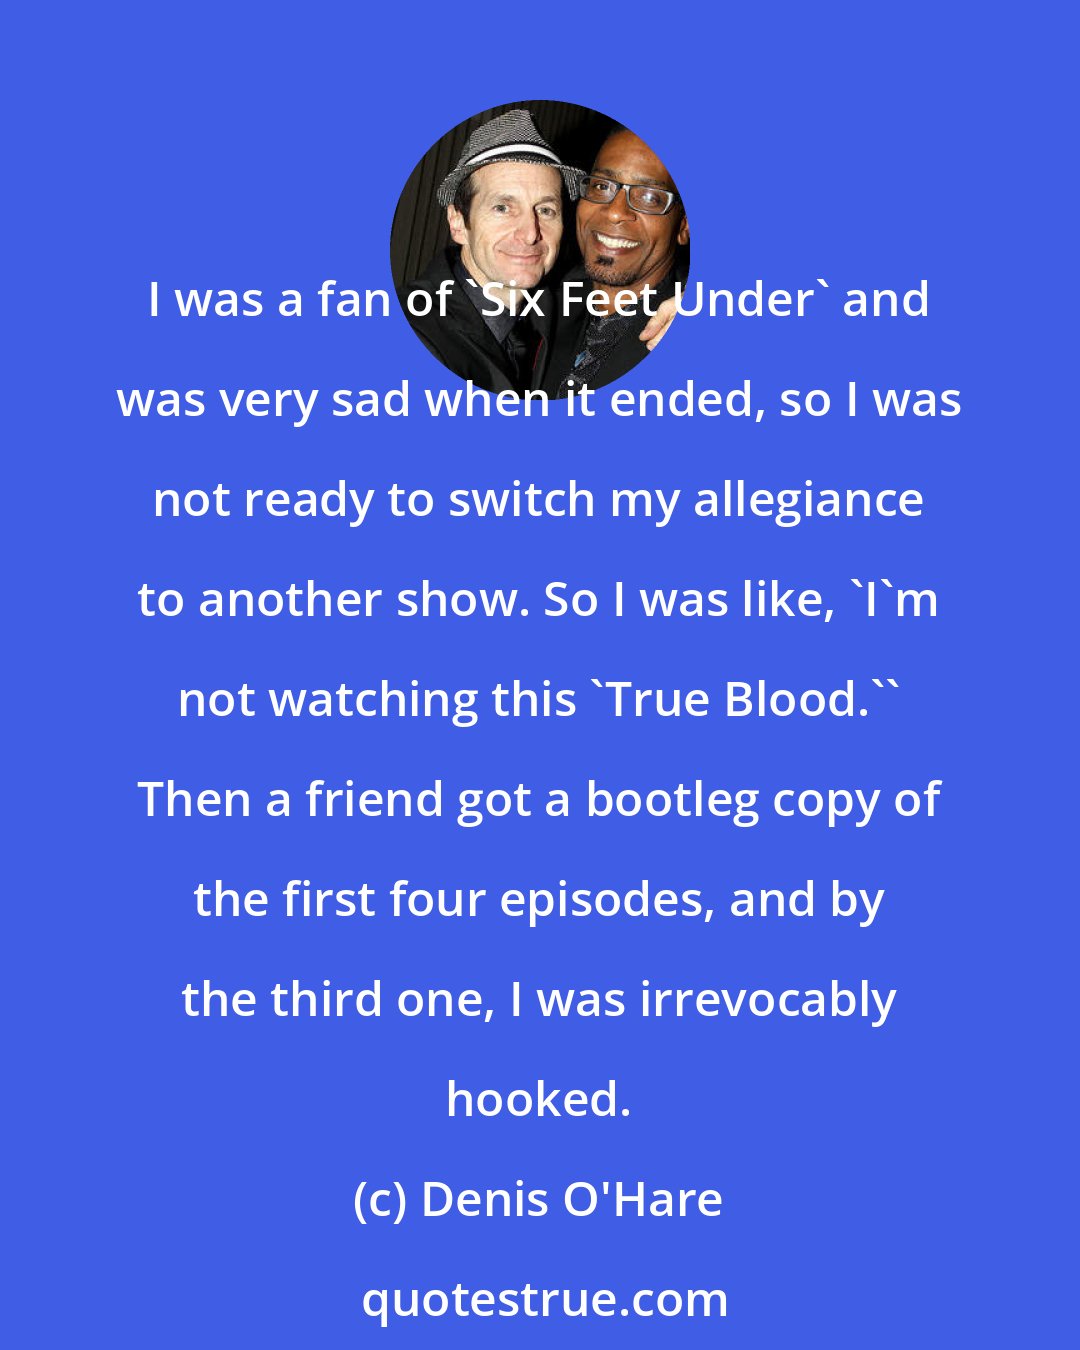 Denis O'Hare: I was a fan of 'Six Feet Under' and was very sad when it ended, so I was not ready to switch my allegiance to another show. So I was like, 'I'm not watching this 'True Blood.'' Then a friend got a bootleg copy of the first four episodes, and by the third one, I was irrevocably hooked.